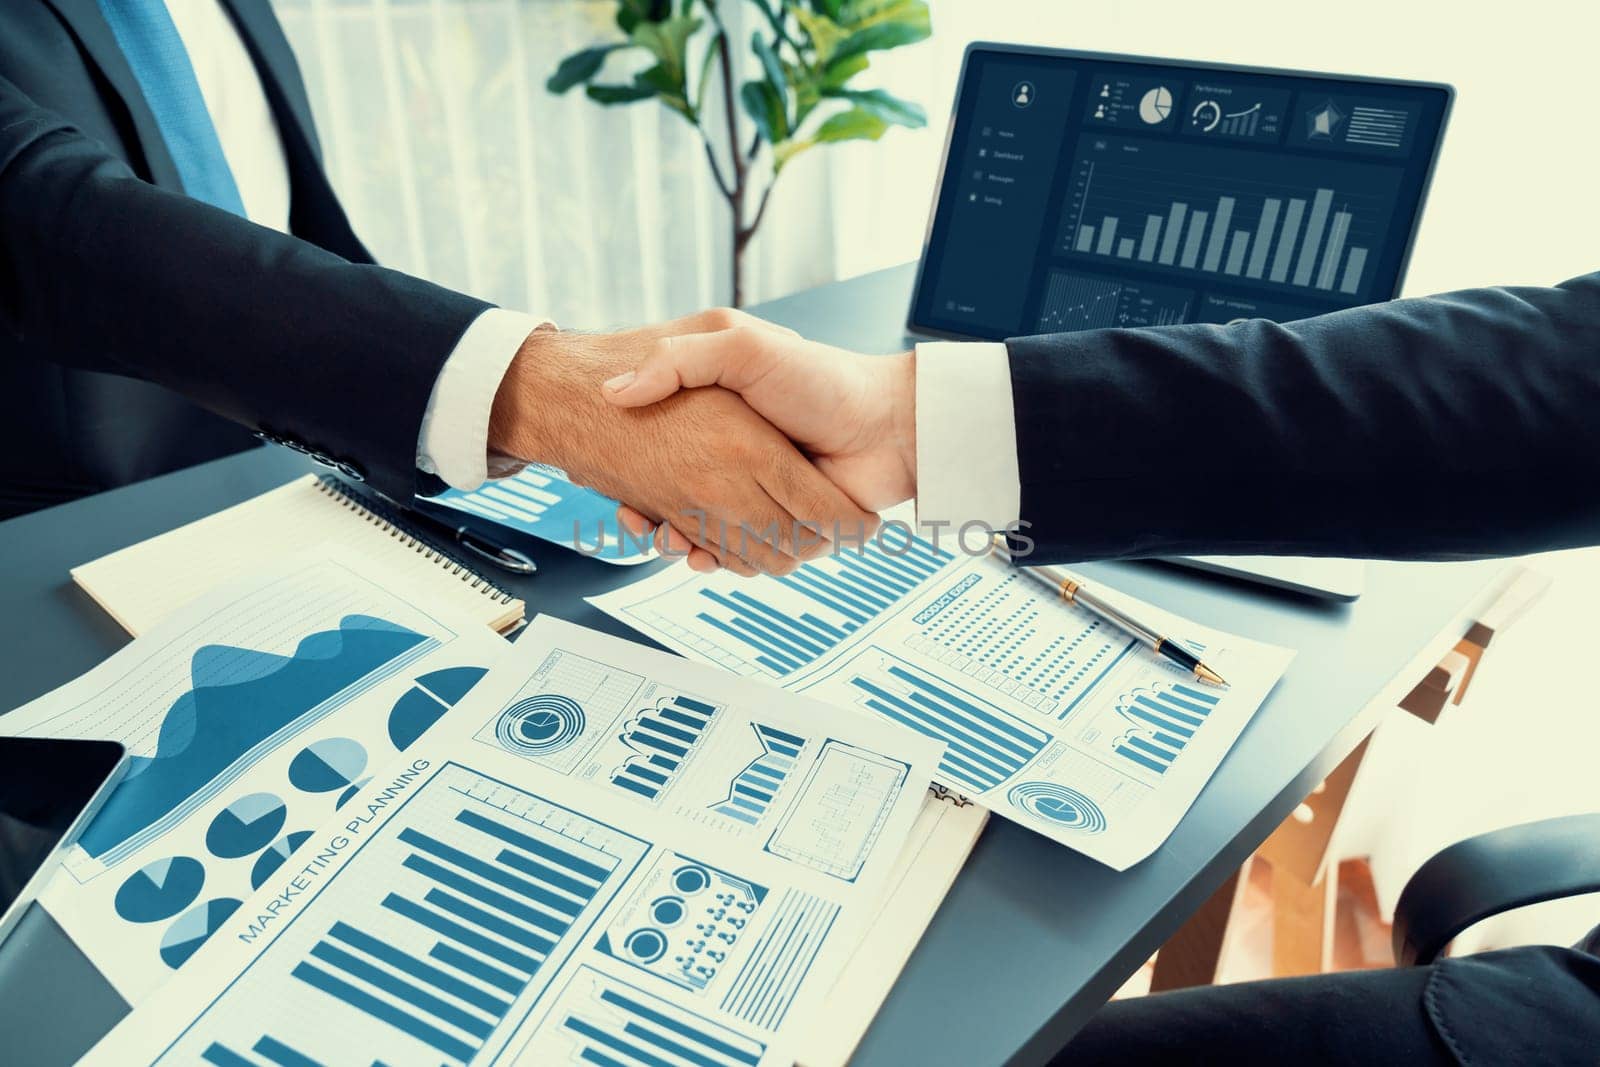 Closeup professional businessman shaking hands over desk in modern office after successfully analyzing pile of dashboard data paper as teamwork and integrity handshake in workplace concept. fervent